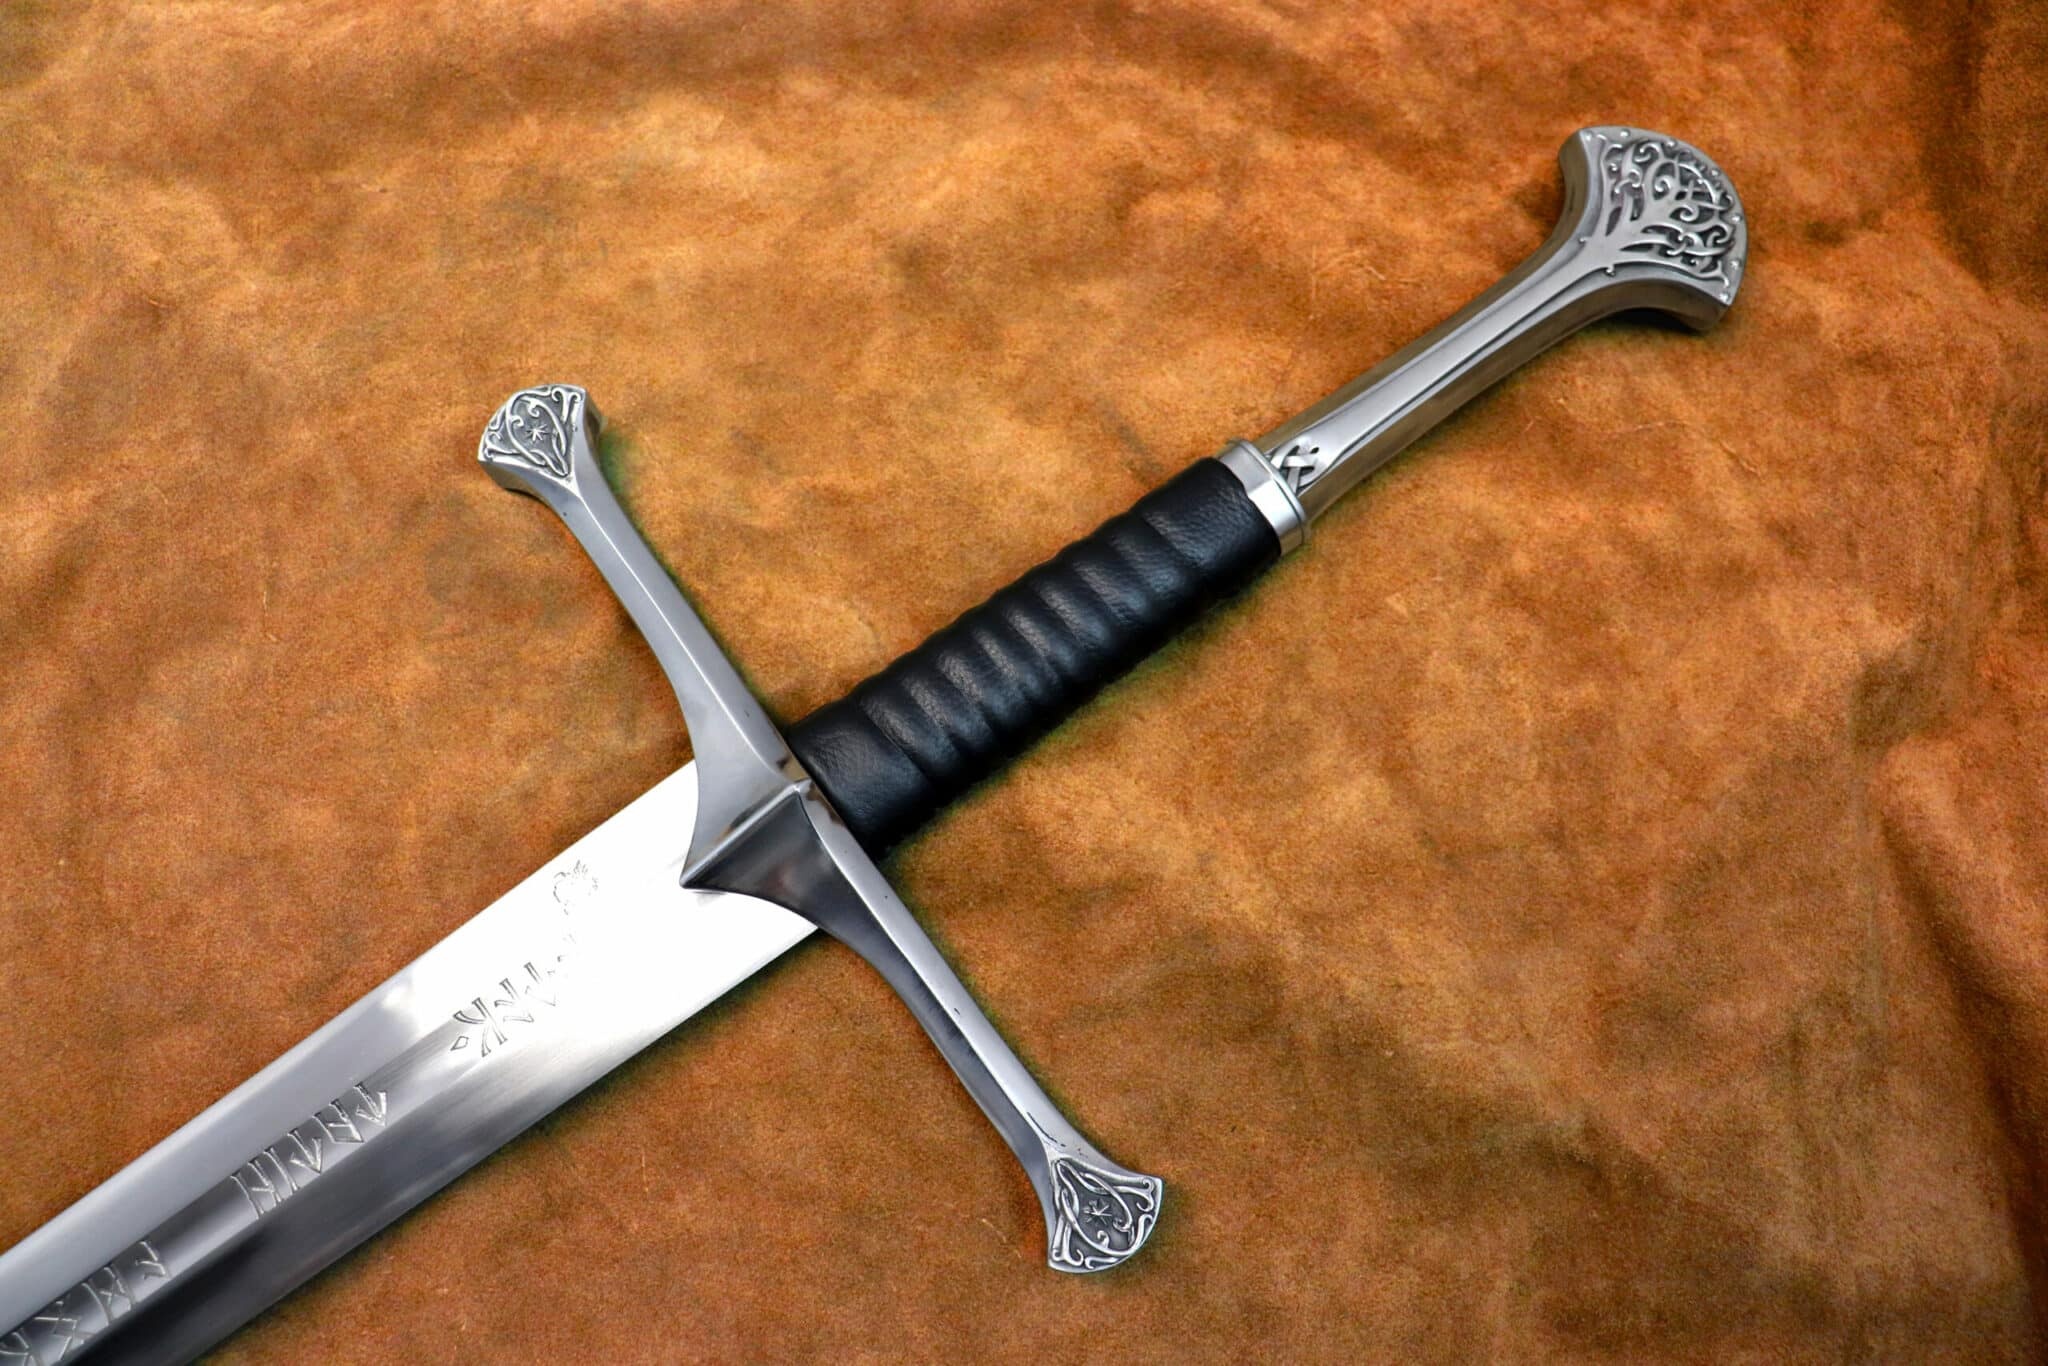 Anduril Sword, Medieval Ware, Sword for sale, Collectible weapon, 2050x1370 HD Desktop